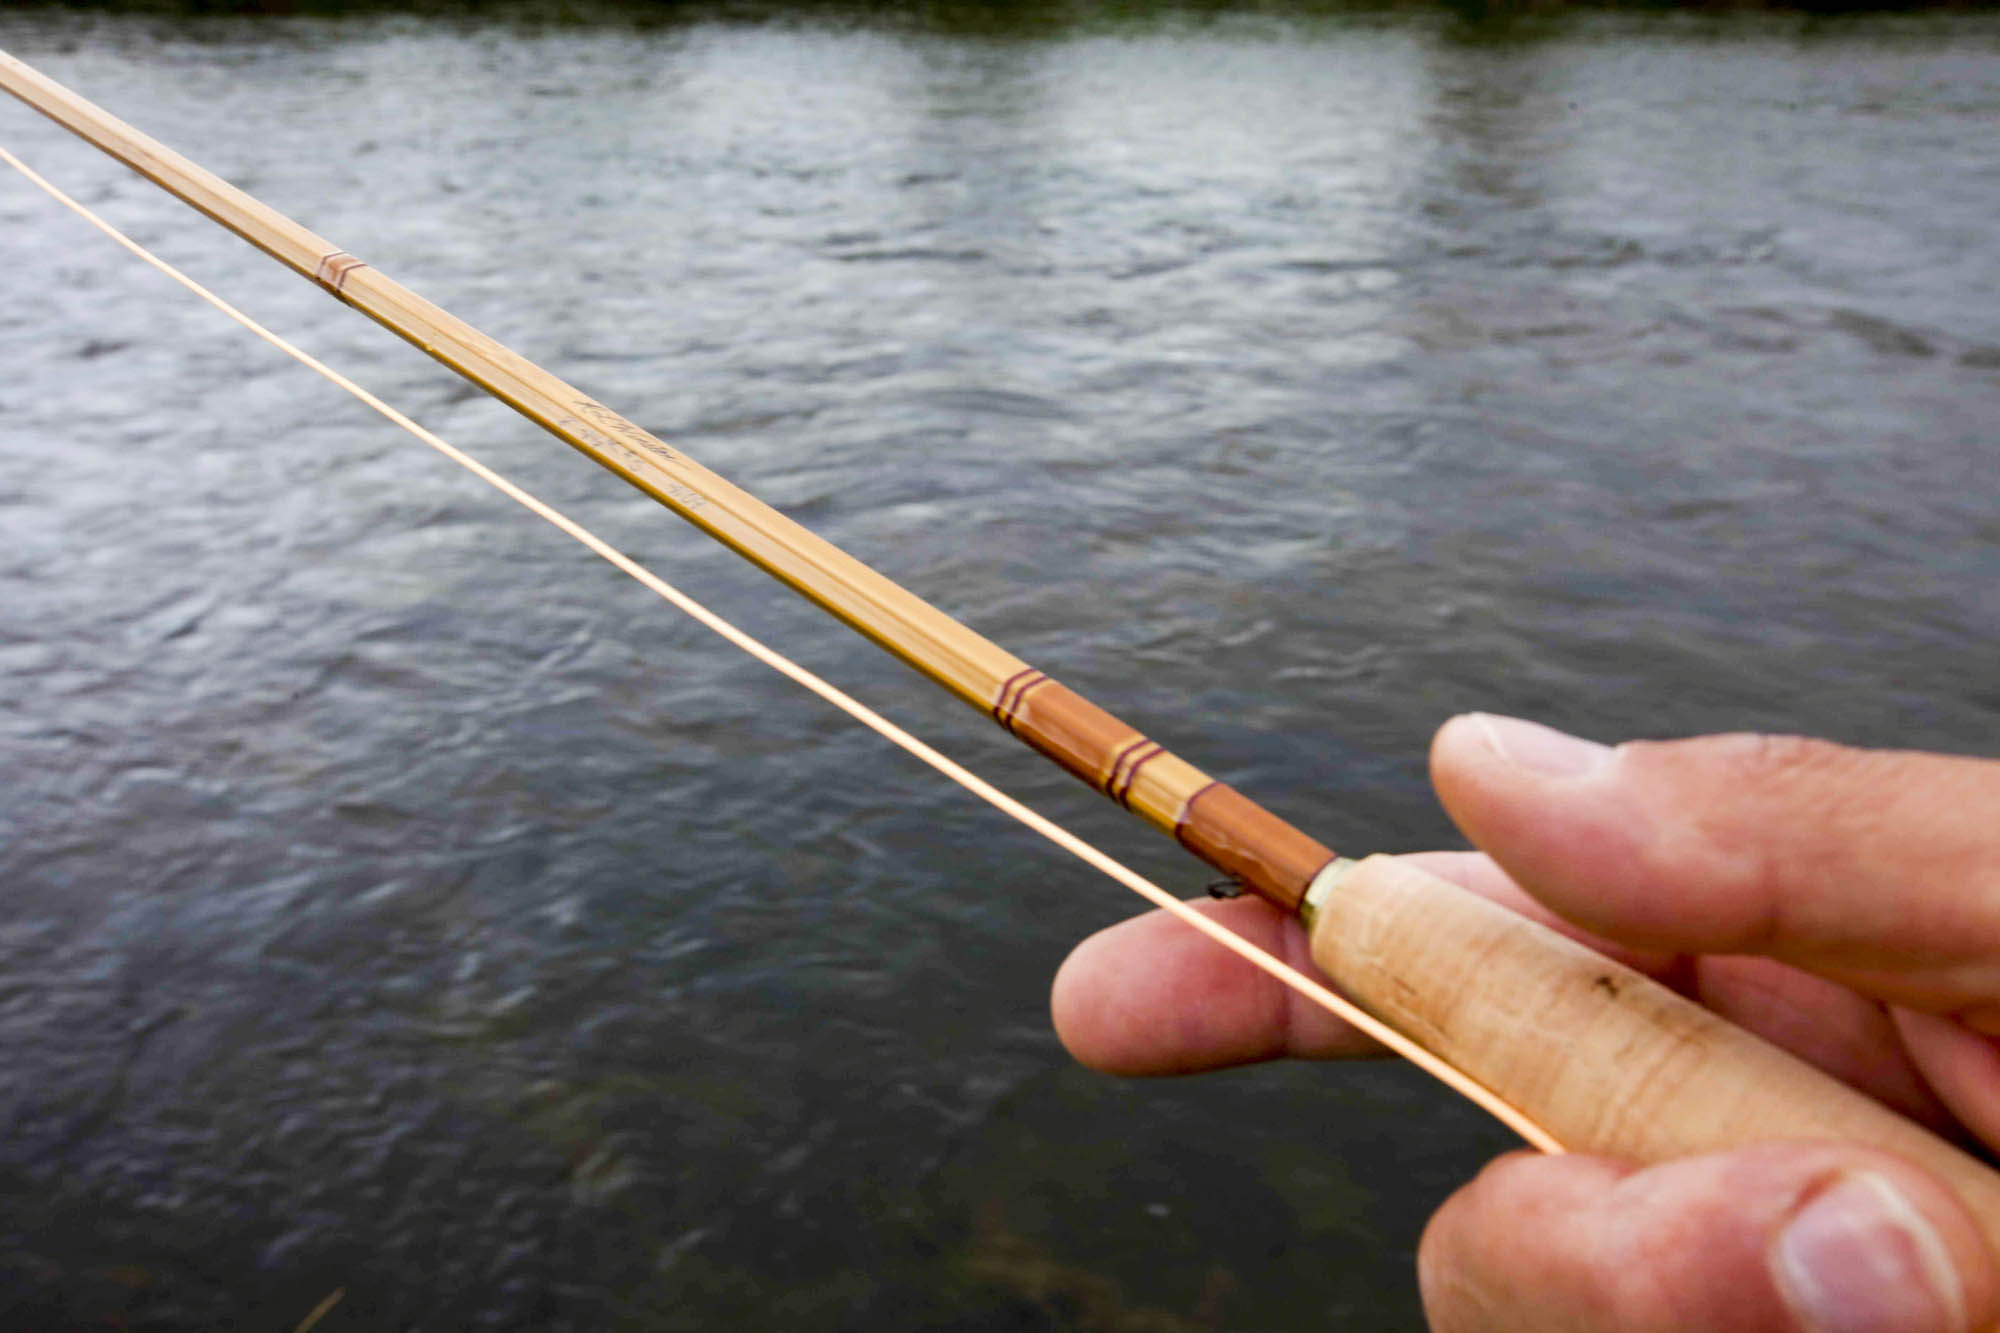 The Obsessive Appeal Behind a Split Bamboo Fishing Rod - Bloomberg